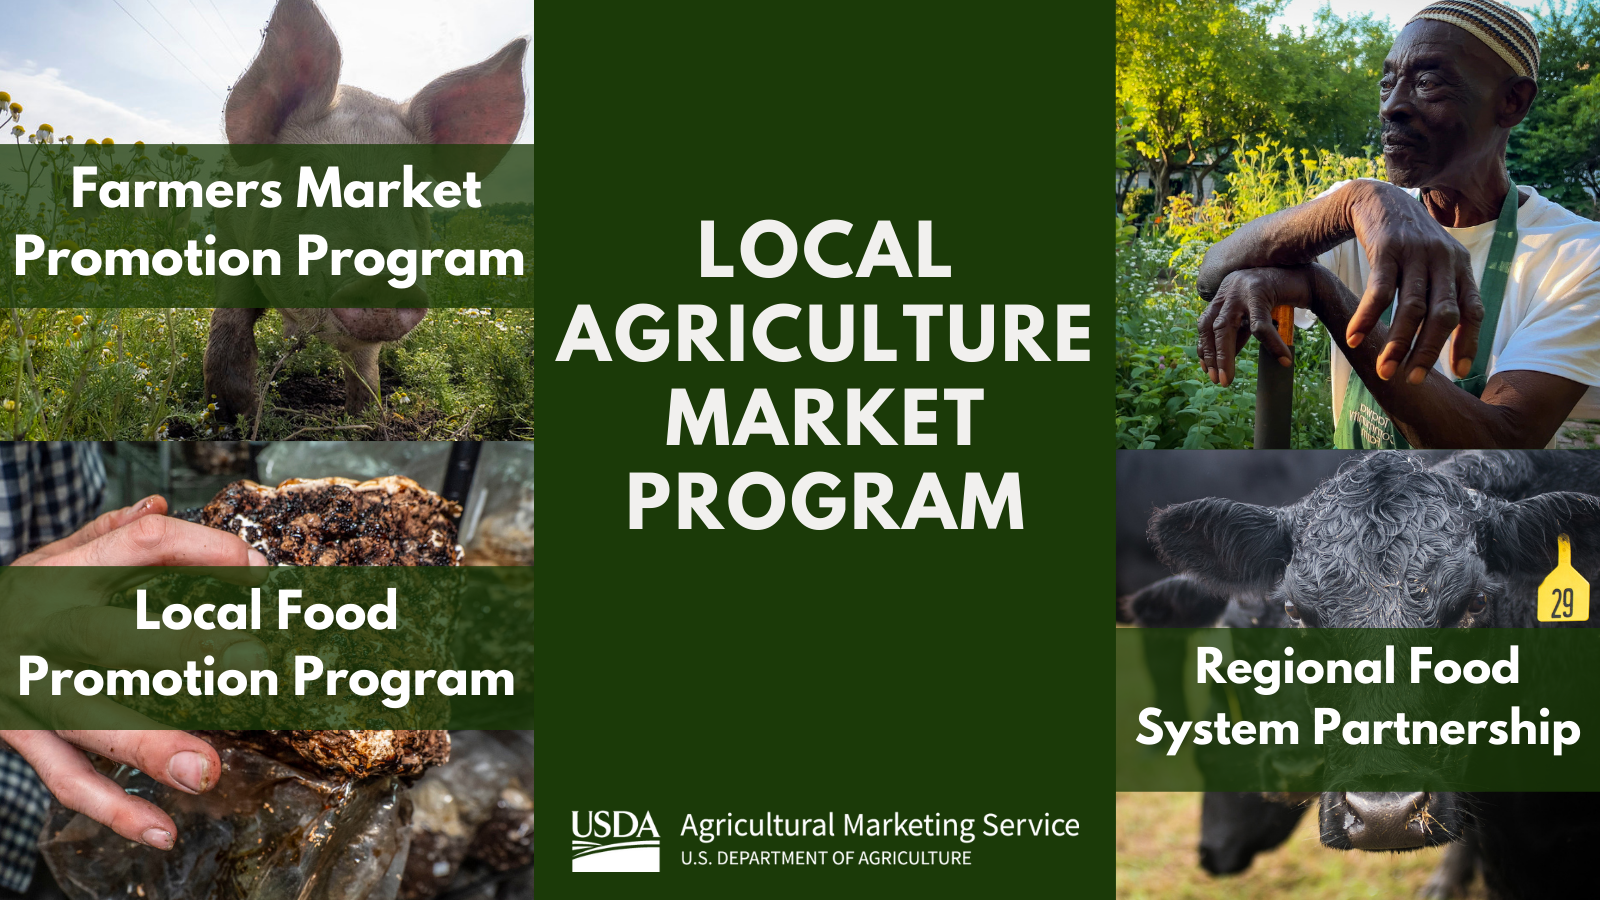 USDA ANNOUNCES LATEST ROUND OF FUNDING TO SUPPORT LOCAL AND REGIONAL FOOD SYSTEM PROJECTS